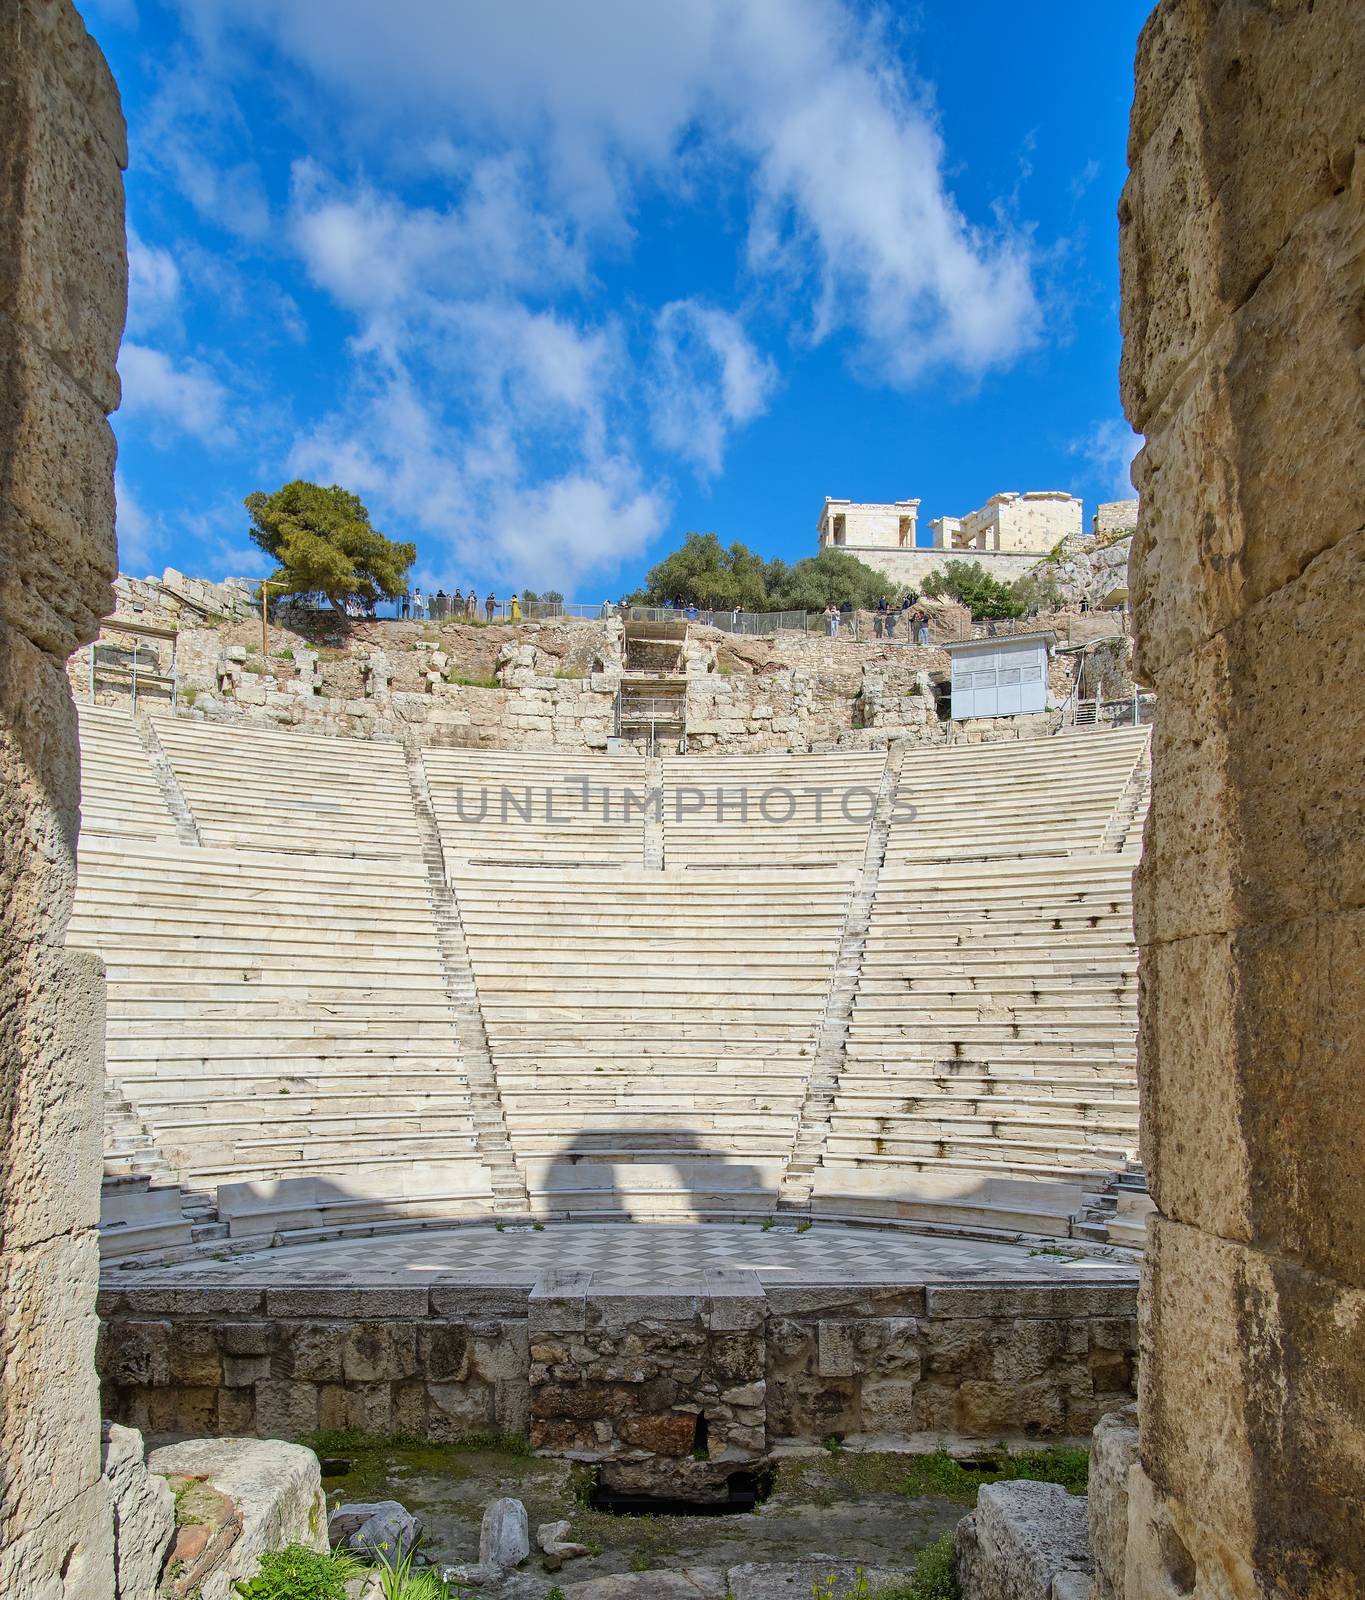 Theater of Dionysus ruins, Acropolis, Athens, Greece by EduardoMT